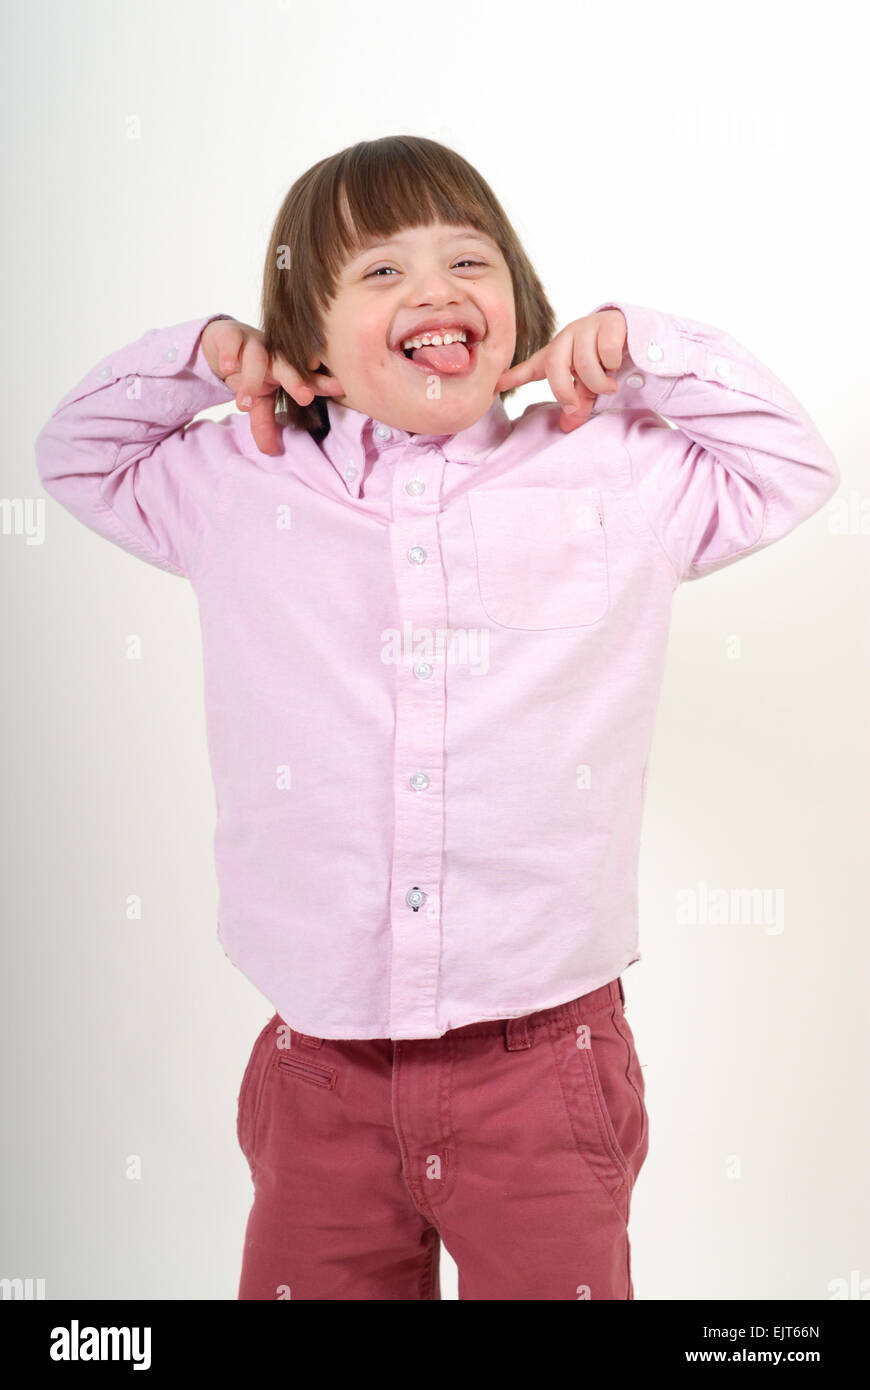 Boy with down syndrome being silly, isolated on white background. Stock Photo